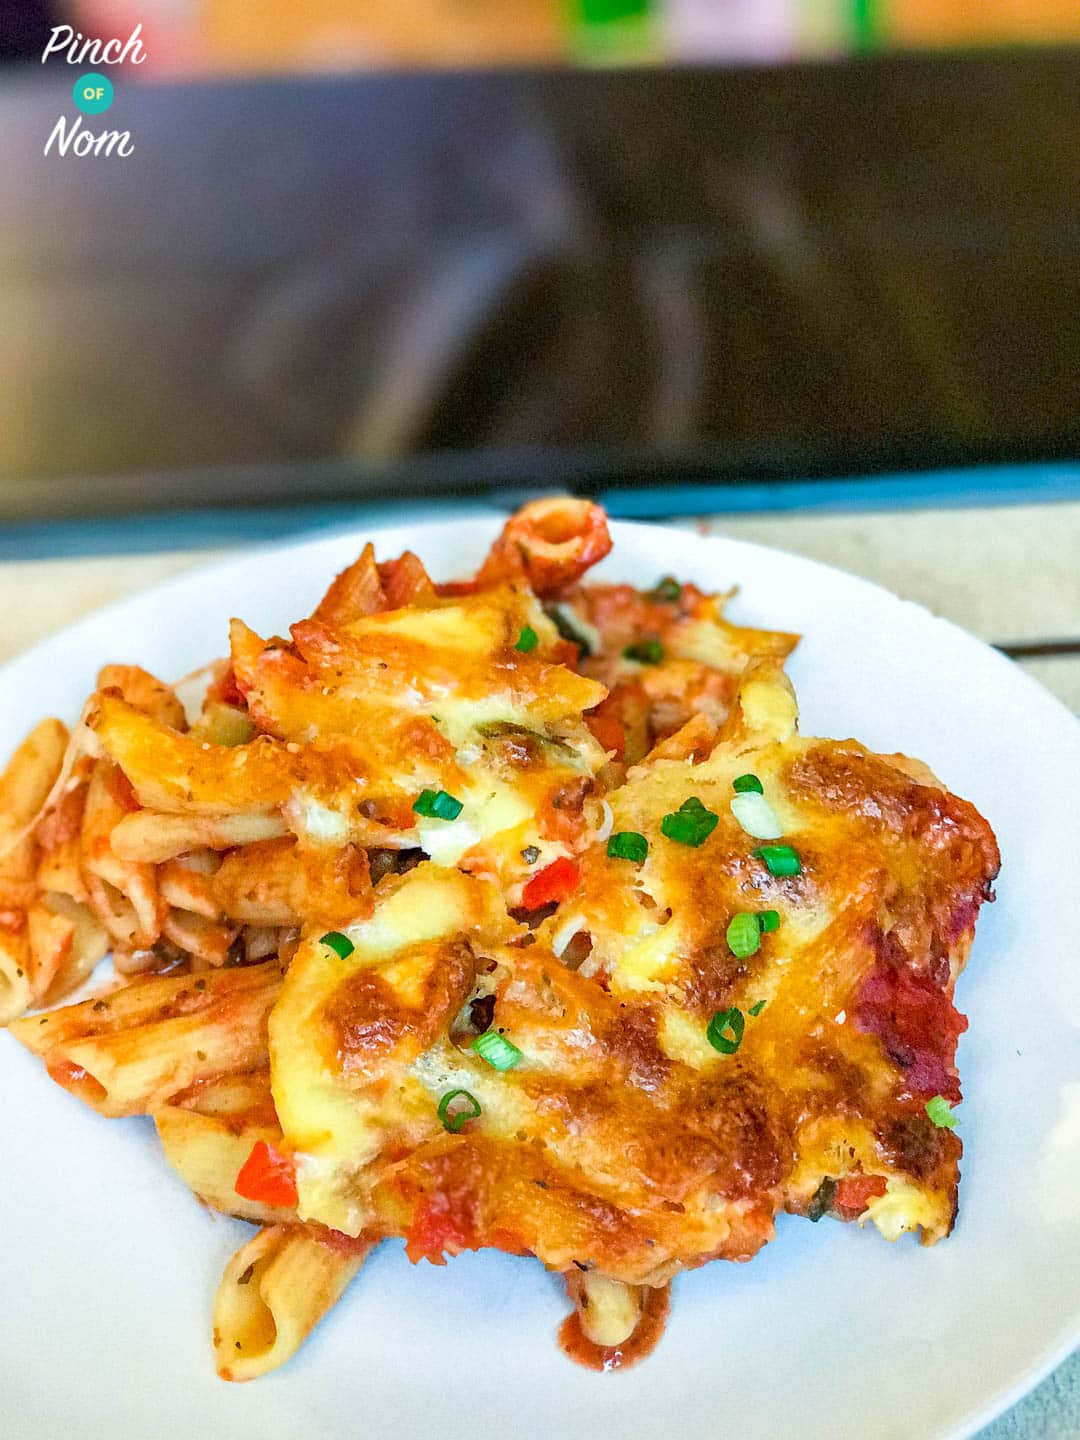 Top Pasta Bake Recipes | Slimming & Weight Watchers Friendly